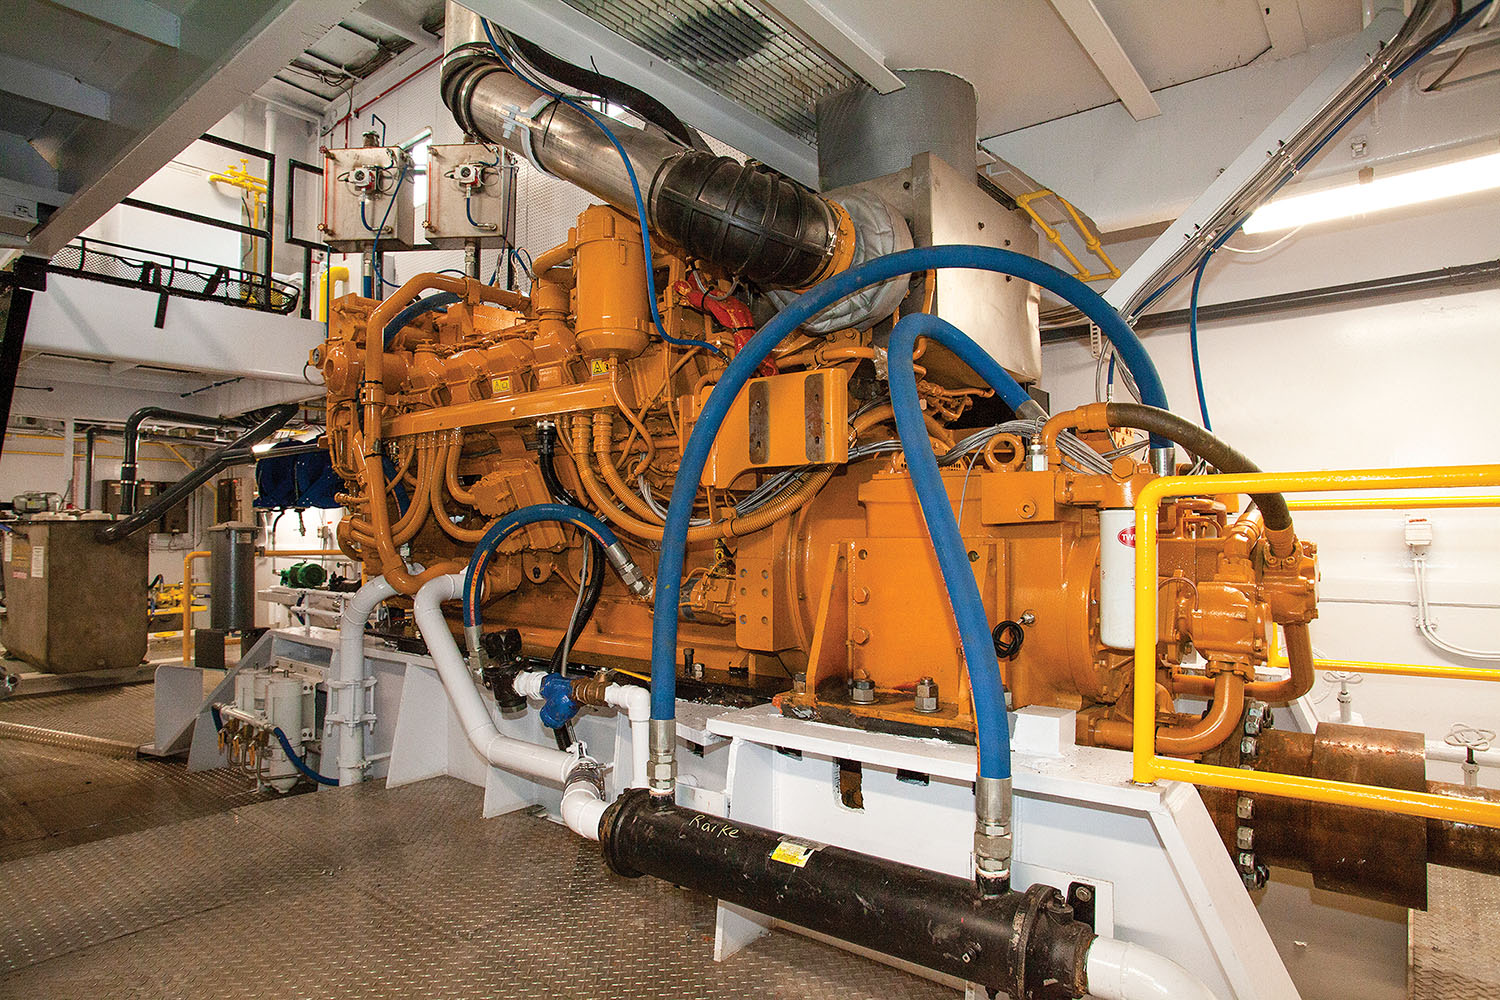 New Caterpillar 3512 Tier 3 engine in the mv. M.J. Monahan. (Photo by Frank McCormack)